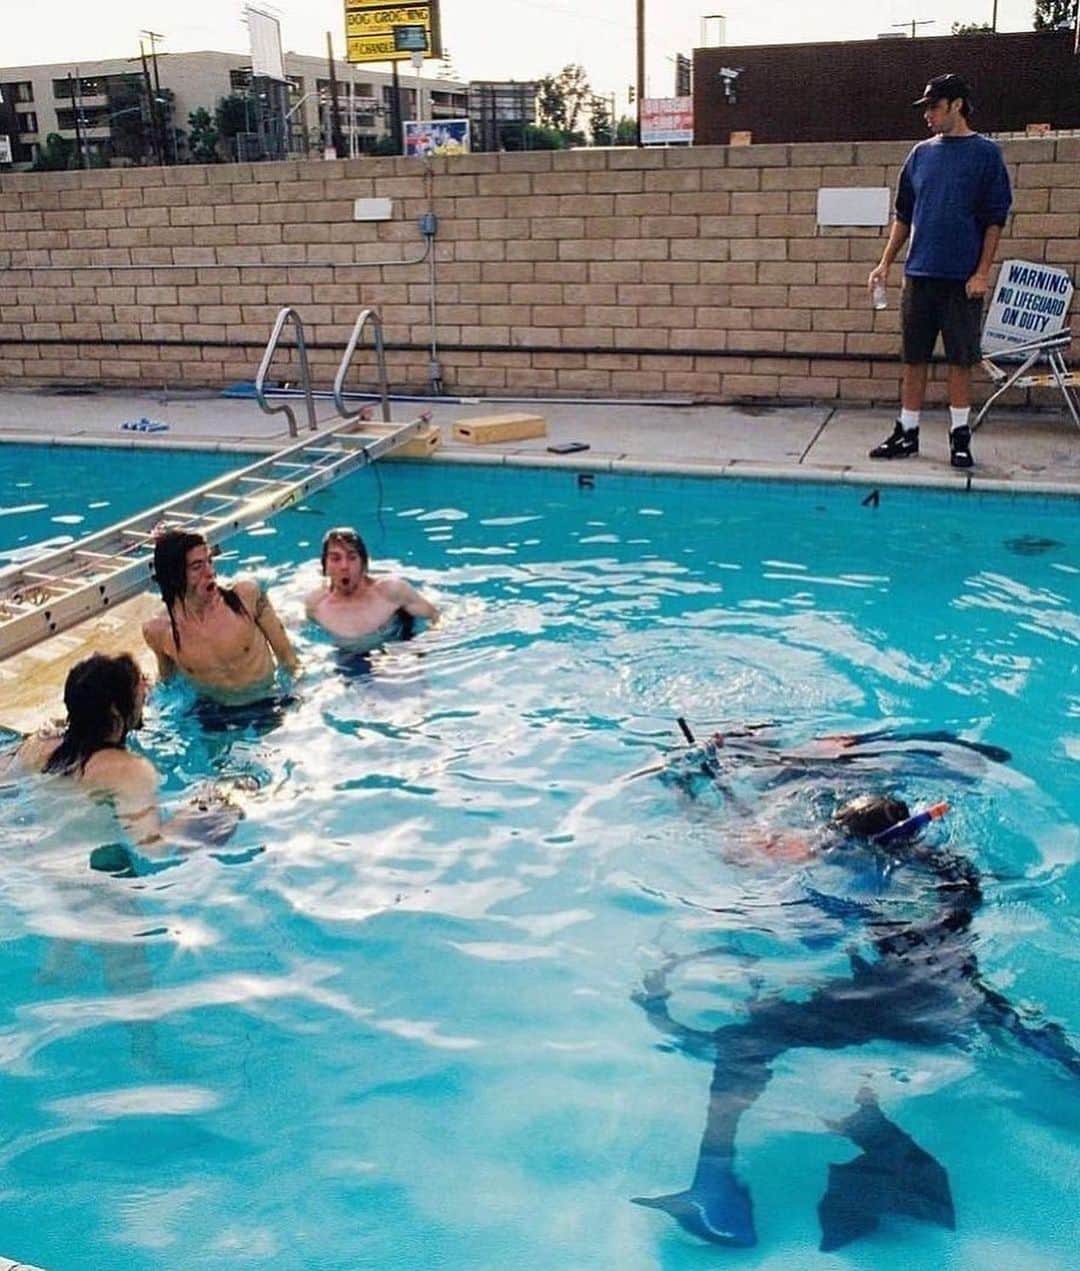 StreetArtGlobeさんのインスタグラム写真 - (StreetArtGlobeInstagram)「A rare behind the scenes shots of Nirvana's 'Nevermind' album cover (1991).   In September 2022, the now 31 year old baby featured on the cover lost his lawsuit claiming that the image constituted child sexual abuse.  In the suit, Spencer Elden claimed the album cover, which depicts him at four months old and was taken by a family friend, caused him “permanent harm” and a “lifelong loss of income-earning capacity”.  The family were originally paid $200 for use of the image. Elden’s suit claimed: “Defendants knowingly produced, possessed and advertised commercial child pornography depicting Spencer.”  Elden said that as a child, he had been unable to consent to the photo being used and sought $140,000 in damages.  US judge Fernando Olguin dismissed the case with prejudice, ruling that it was filed past the 10-year statute of limitations.  Elden first filed against Dave Grohl, bassist Krist Novoselic, Courtney Love and the estate of Kurt Cobain, photographer Kirk Weddle and several record labels in 2021. The suit was thrown out after he missed a deadline to respond to the defendants’ motion to dismiss, which described Elden’s claim as “not serious”.  ‘The cover is supposed to be provocative’: the daunting task of redesigning Nirvana’s Nevermind. It continued: “A brief examination of the photograph, or Elden’s own conduct (not to mention the photograph’s presence in the homes of millions of Americans who, on Elden’s theory, are guilty of felony possession of child pornography) makes that clear.”  A defence lawyer welcomed the ruling, describing the case as “meritless”. The defendants had previously argued that Elden had “spent three decades profiting from his celebrity as the self-anointed ‘Nirvana Baby’”, including recreating the image for the album’s 15th and 25th anniversaries. Elden also has a tattoo of the word Nevermind on his chest.  In 2015, Elden told the Guardian: “It is a weird thing to get my head around, being part of such a culturally iconic image. But it’s always been a positive thing and opened doors for me. I’m 23 now and an artist, and this story gave me an opportunity to work with Shepard Fairey for five years, which was an awesome experience.”」6月23日 22時00分 - streetartglobe